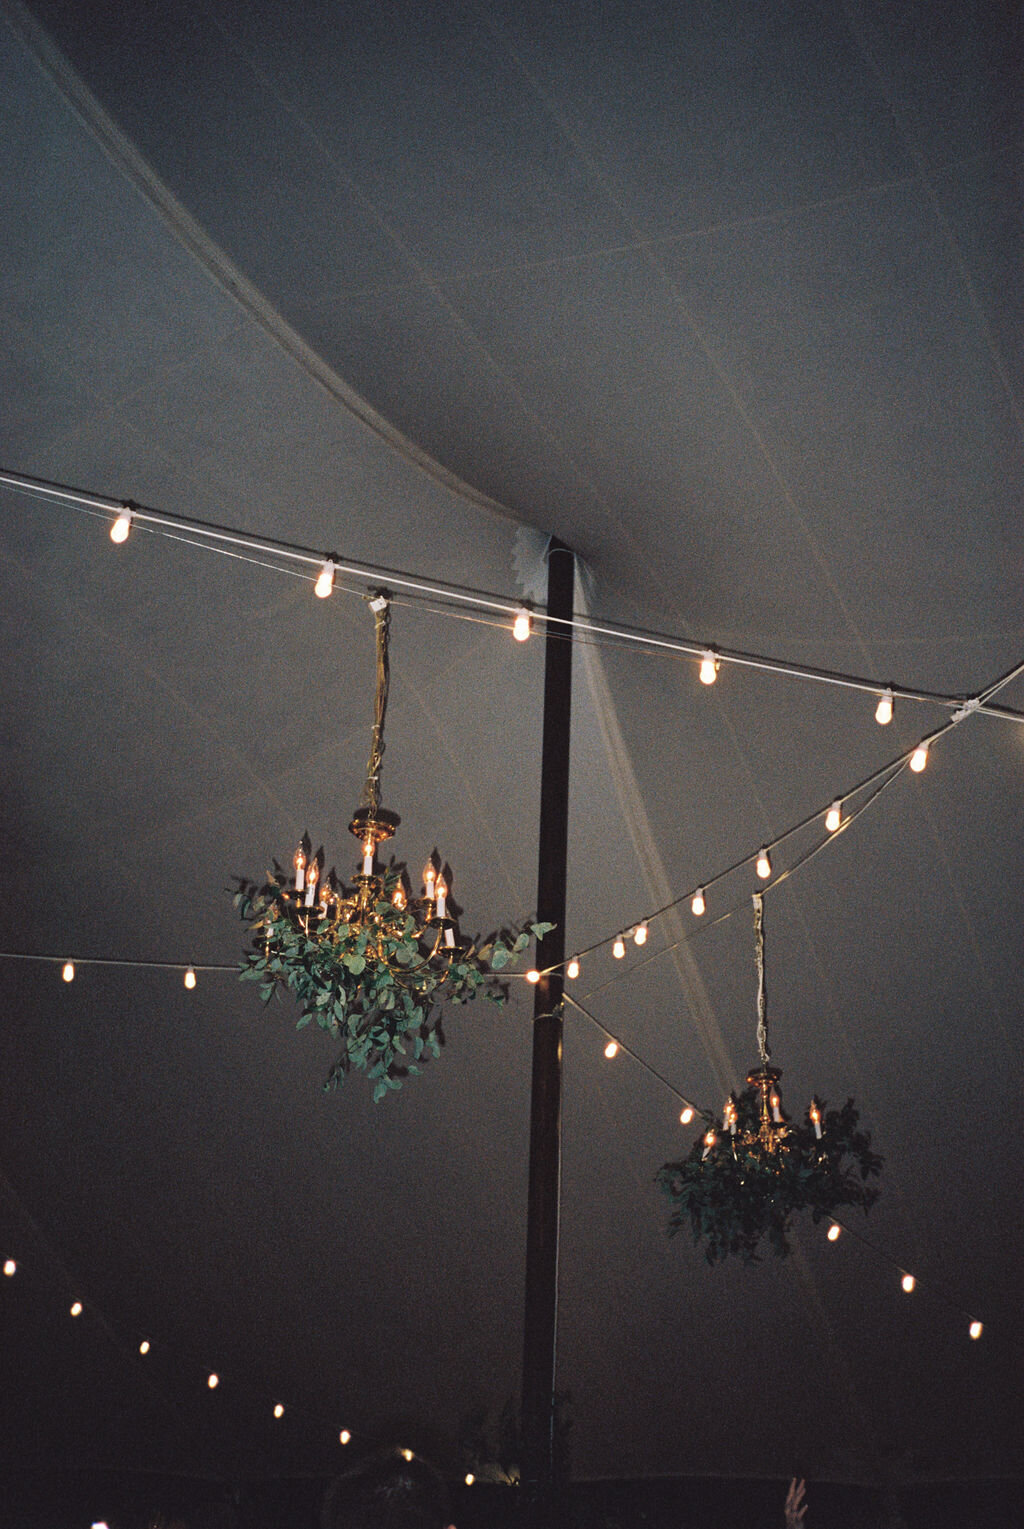 Gold chandeliers inside the tent at night with smilax greenery hanging from them.